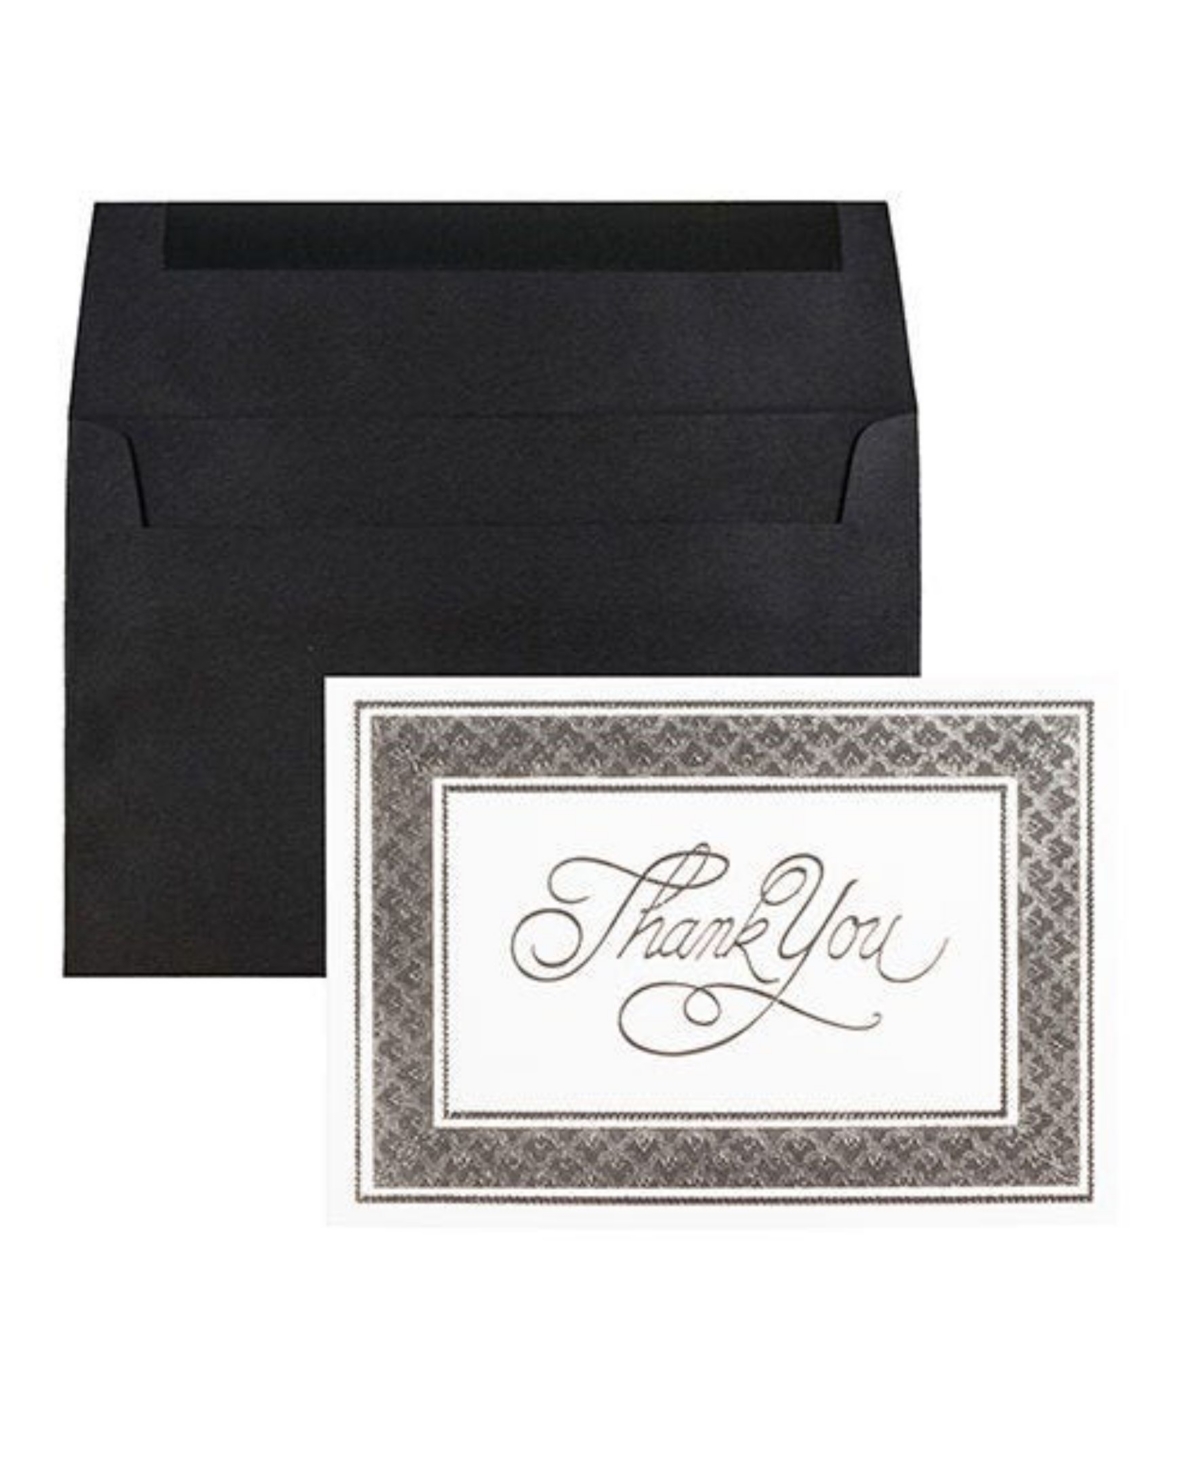 Thank You Card Sets - 25 Cards and Envelopes - Silver Border Cards with Black Linen Env